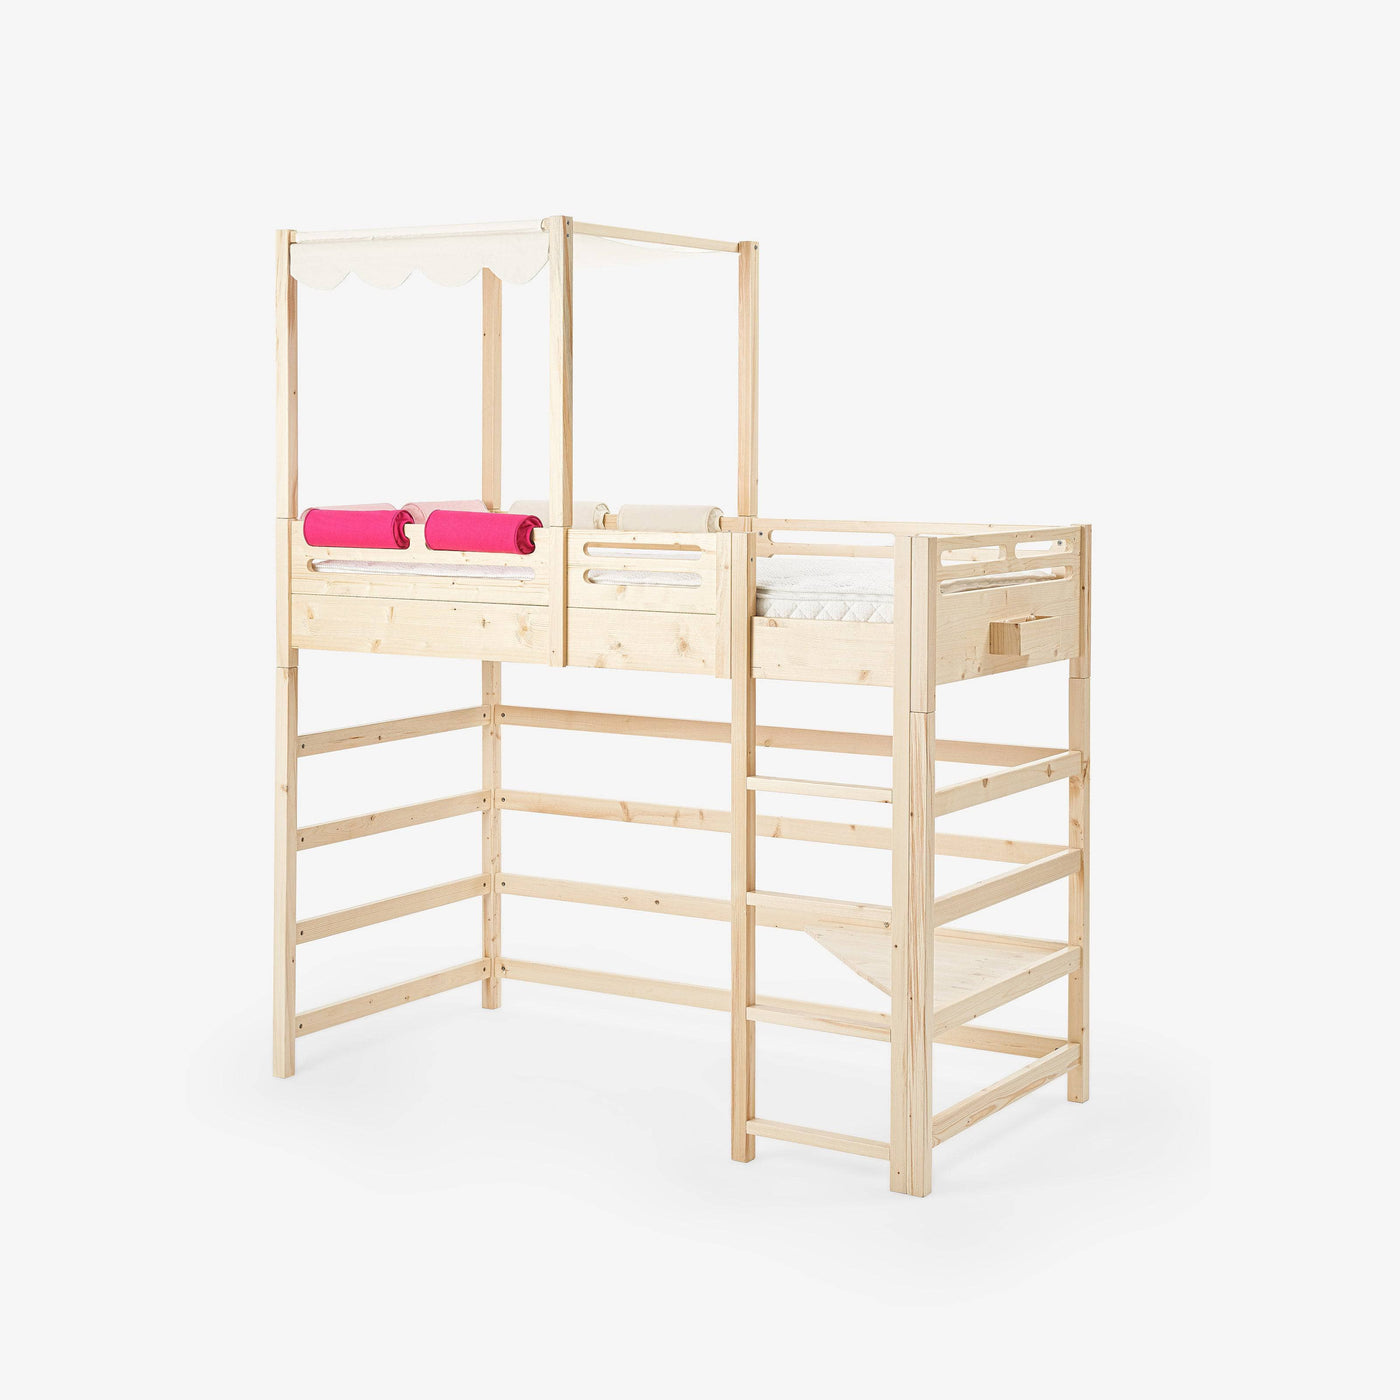 Four Poster Bed, Canopy, Off-White Kids Furniture sazy.com